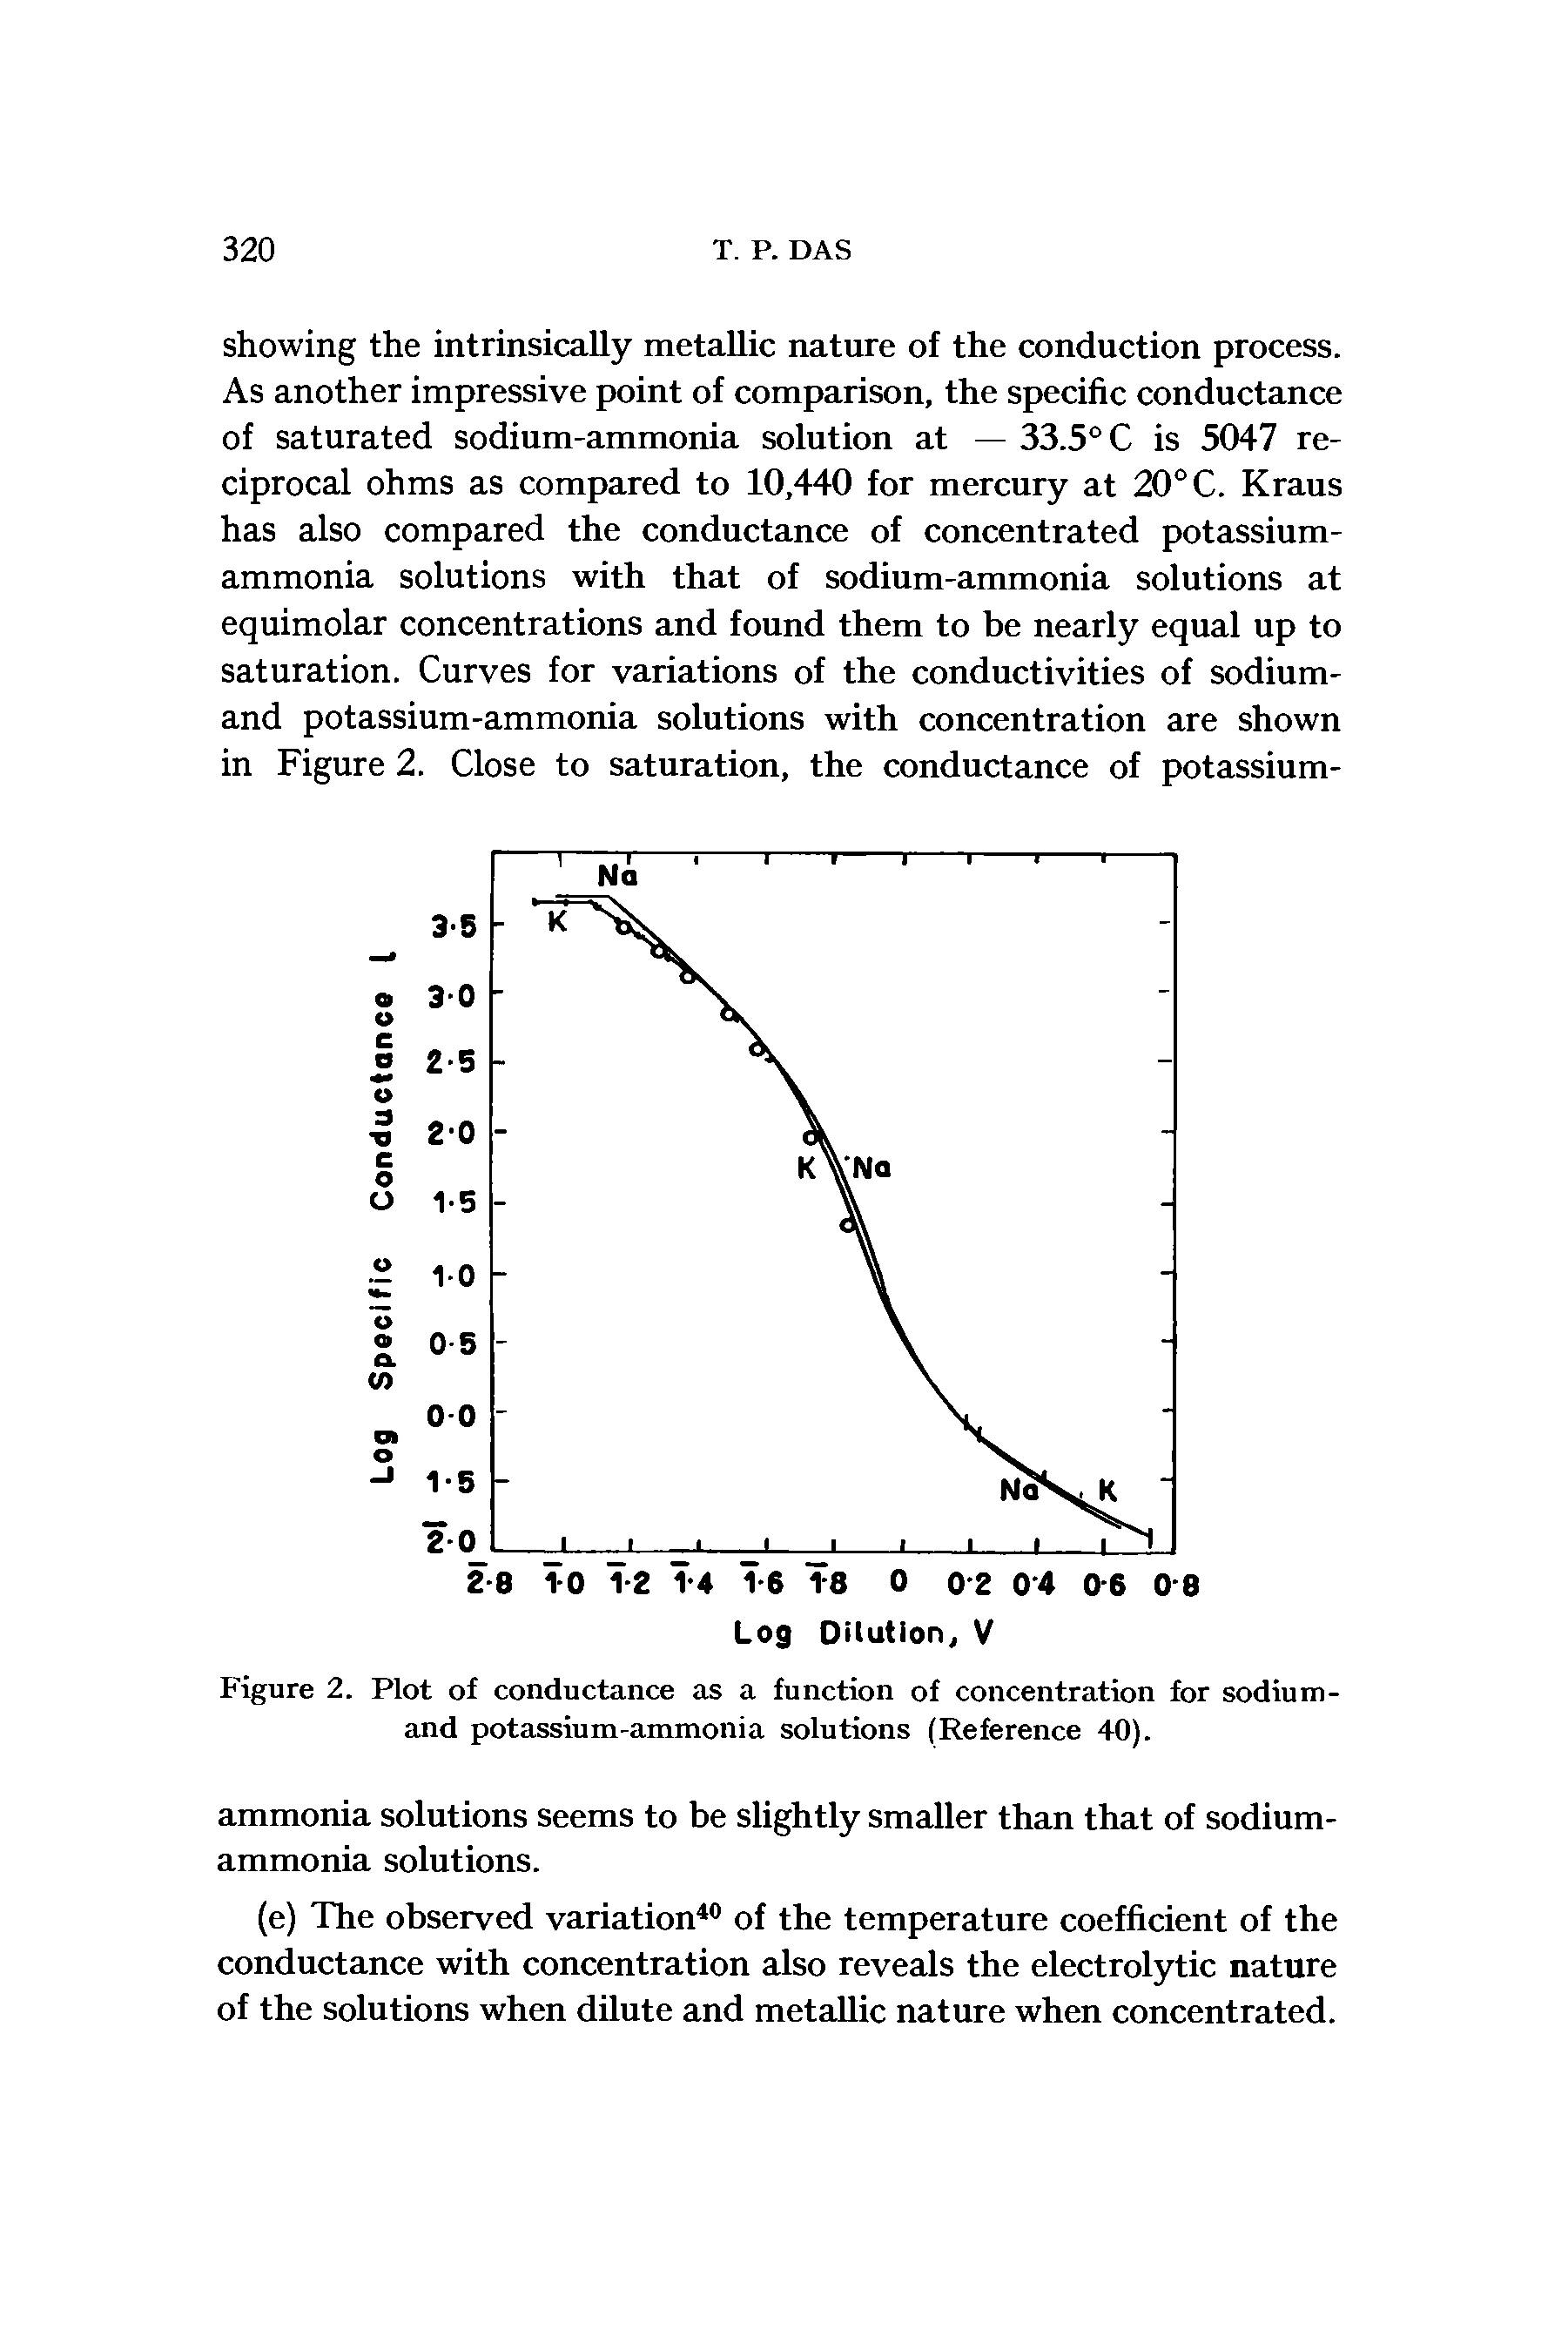 Figure 2. Plot of conductance as a function of concentration for sodium-and potassium-ammonia solutions (Reference 40).